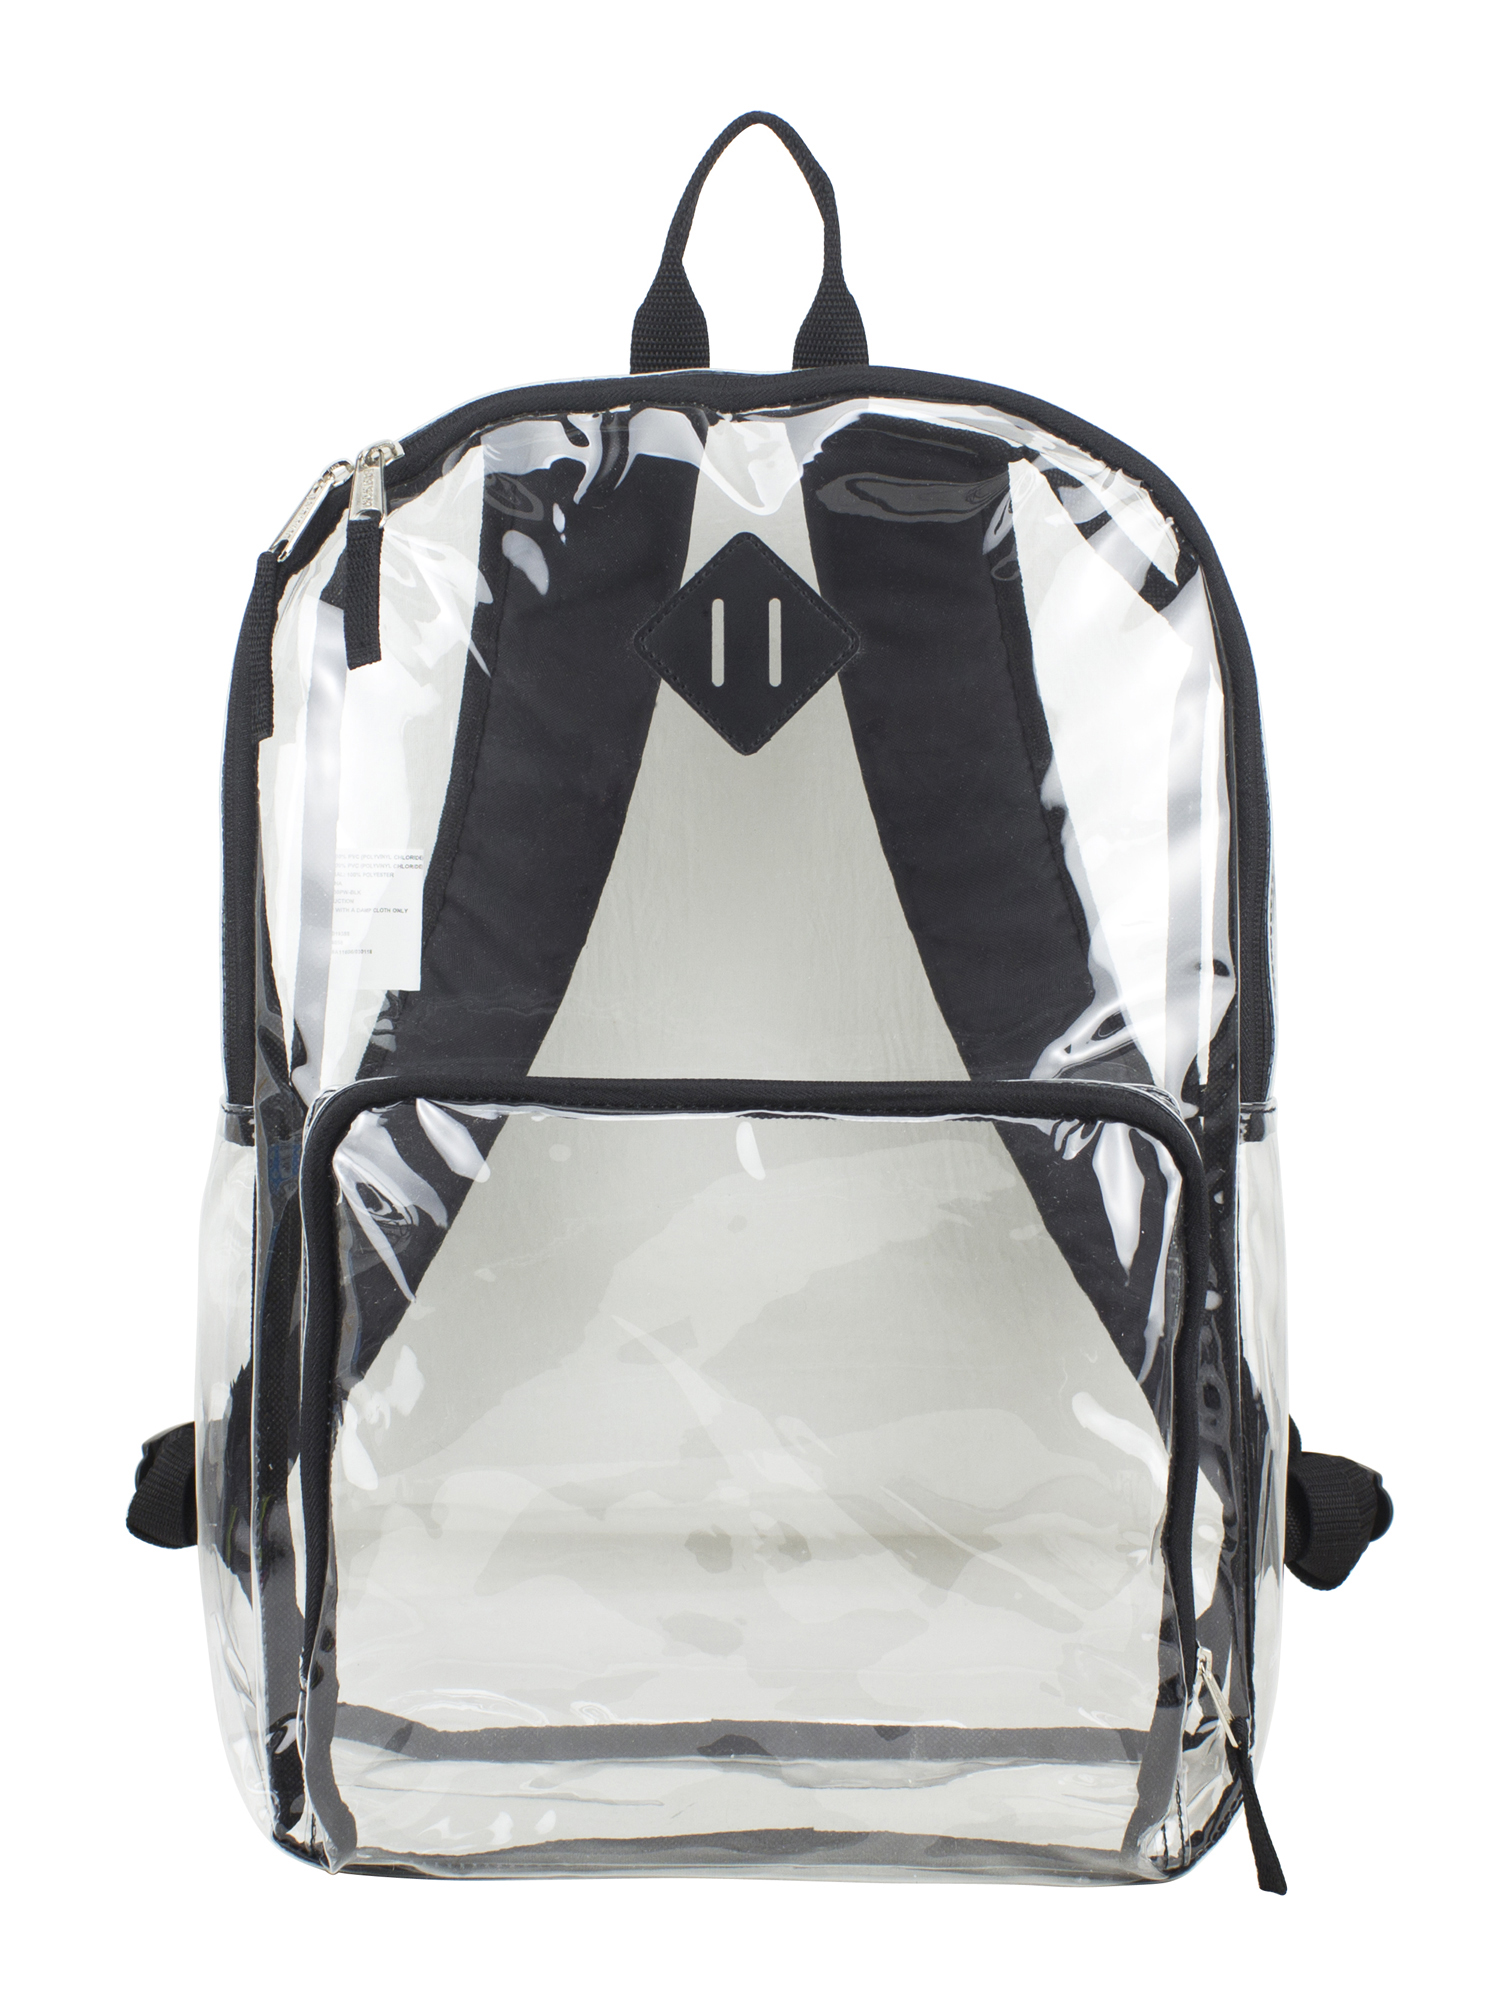 Eastsport Unisex Multi-Purpose Clear Backpack with Front Pocket, Adjustable Straps and Lash Tab Clear - image 3 of 6